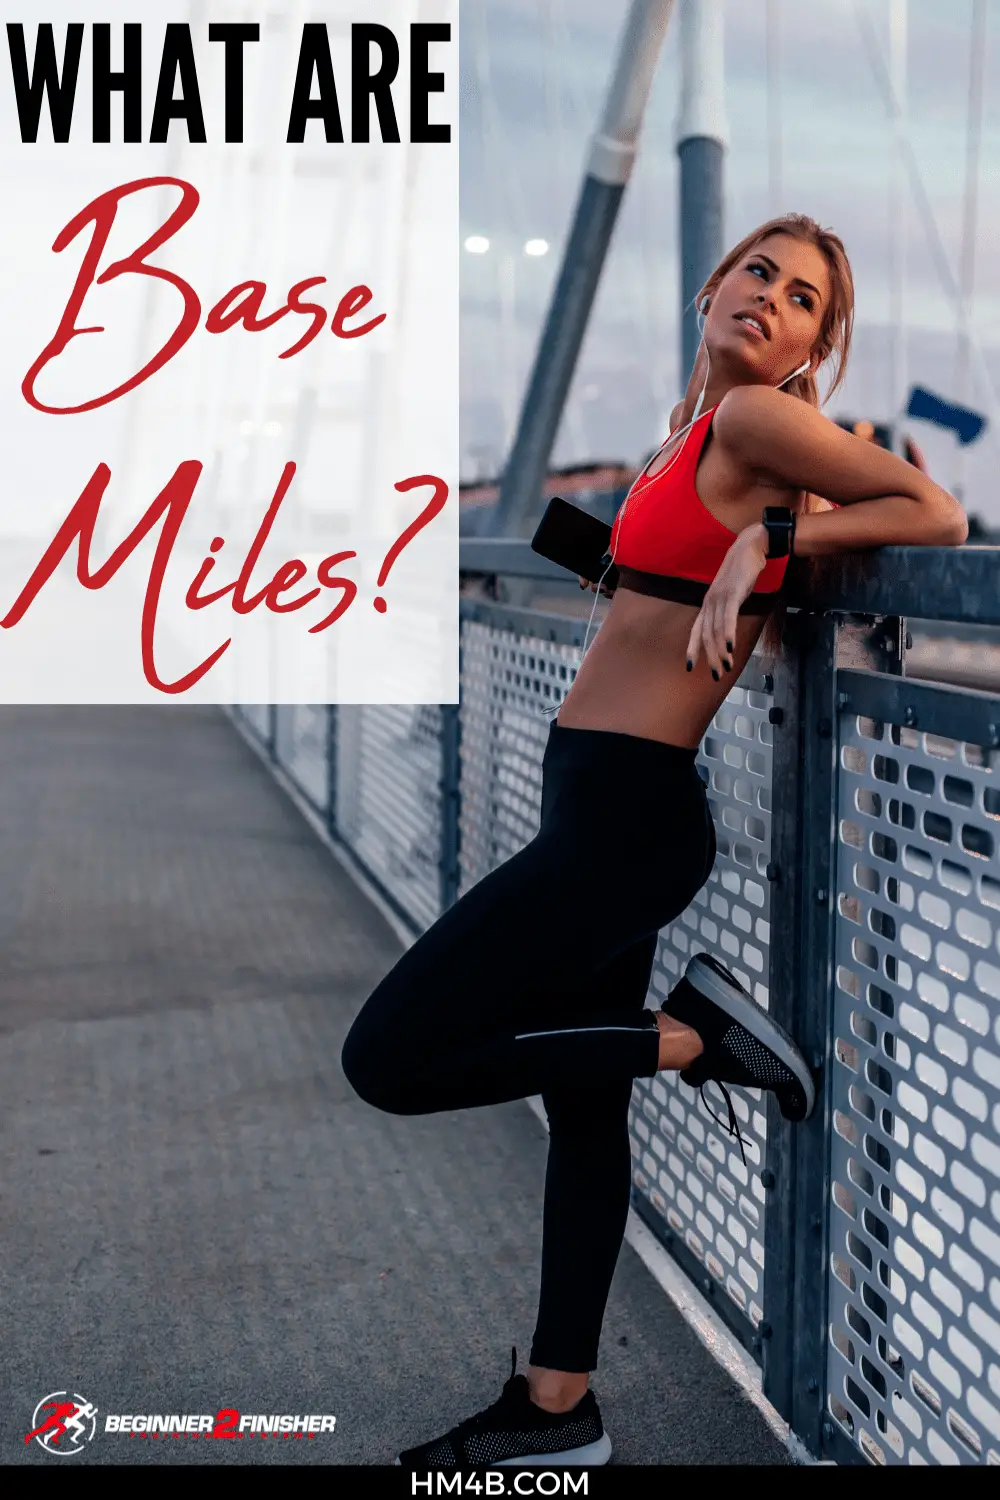 What are base miles?